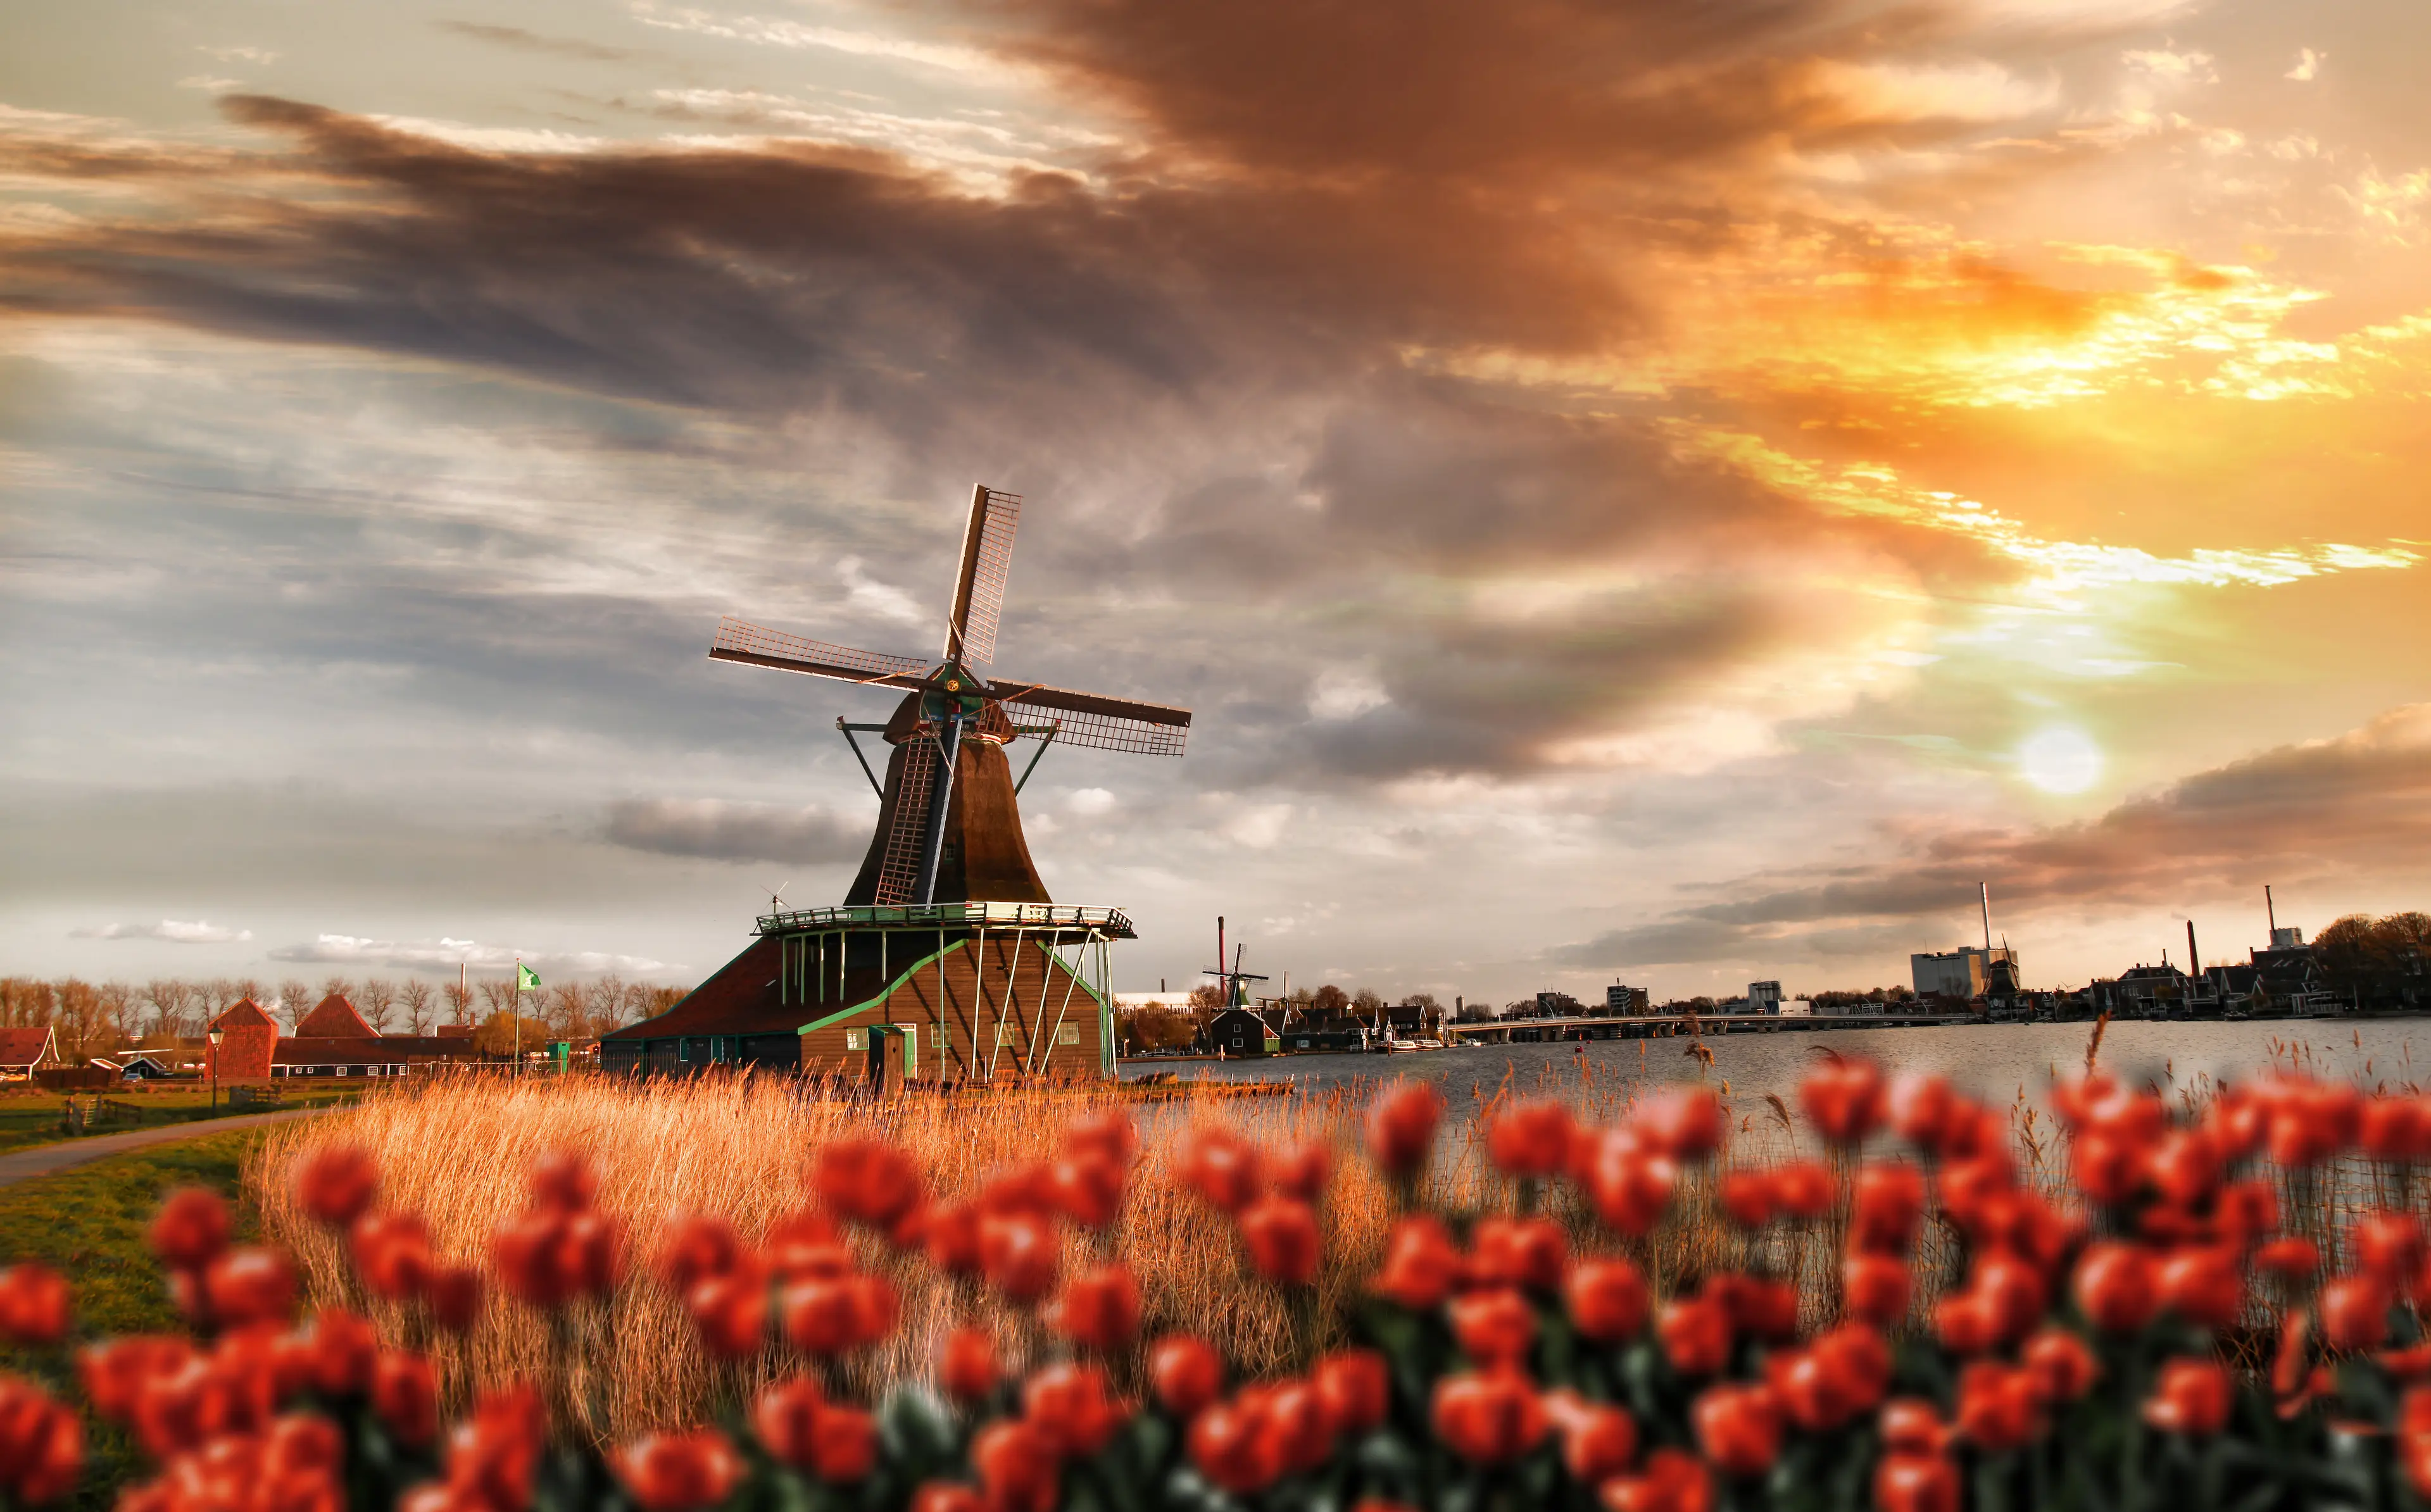 Dutch windmills with red tulips